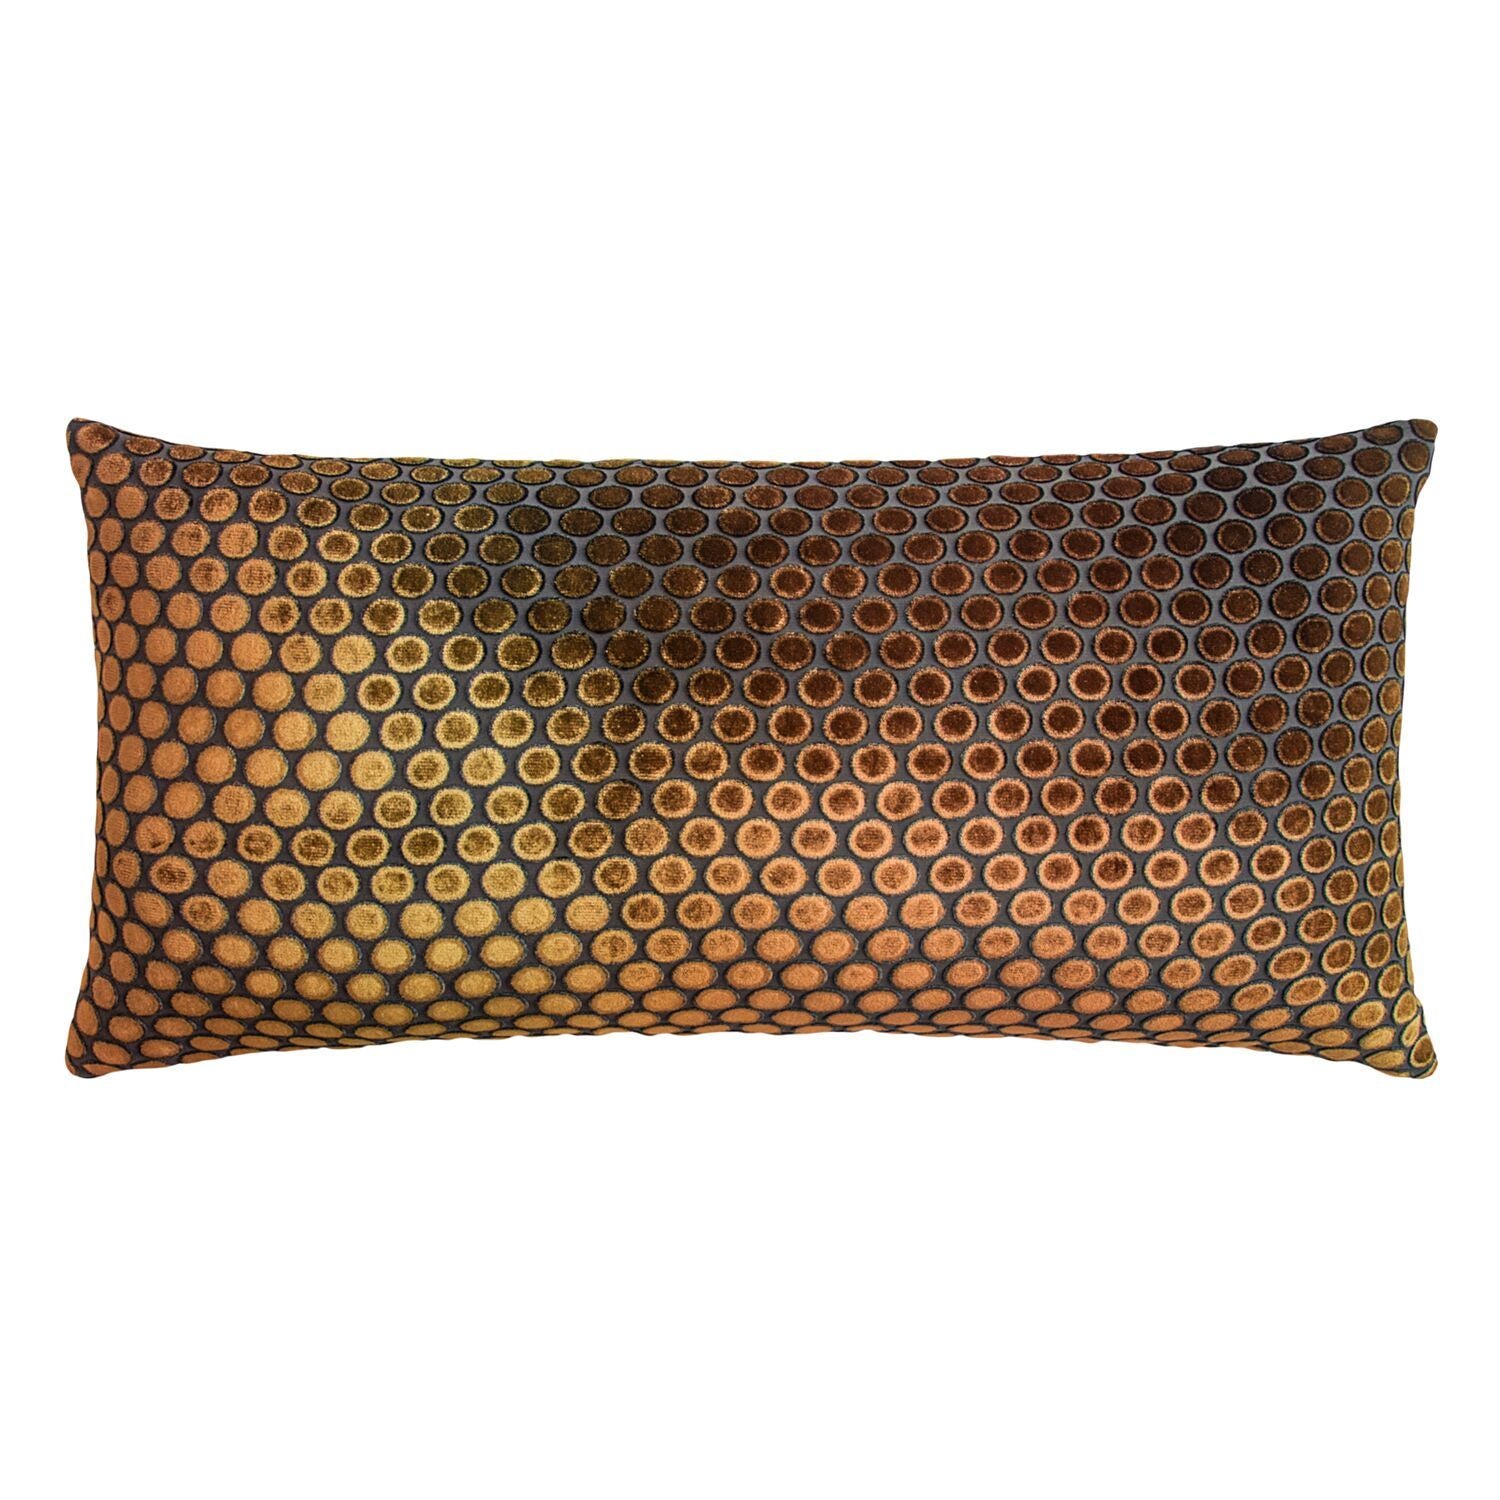 Dots Velvet Pillows in Copper Ivy by Kevin O'Brien Studio